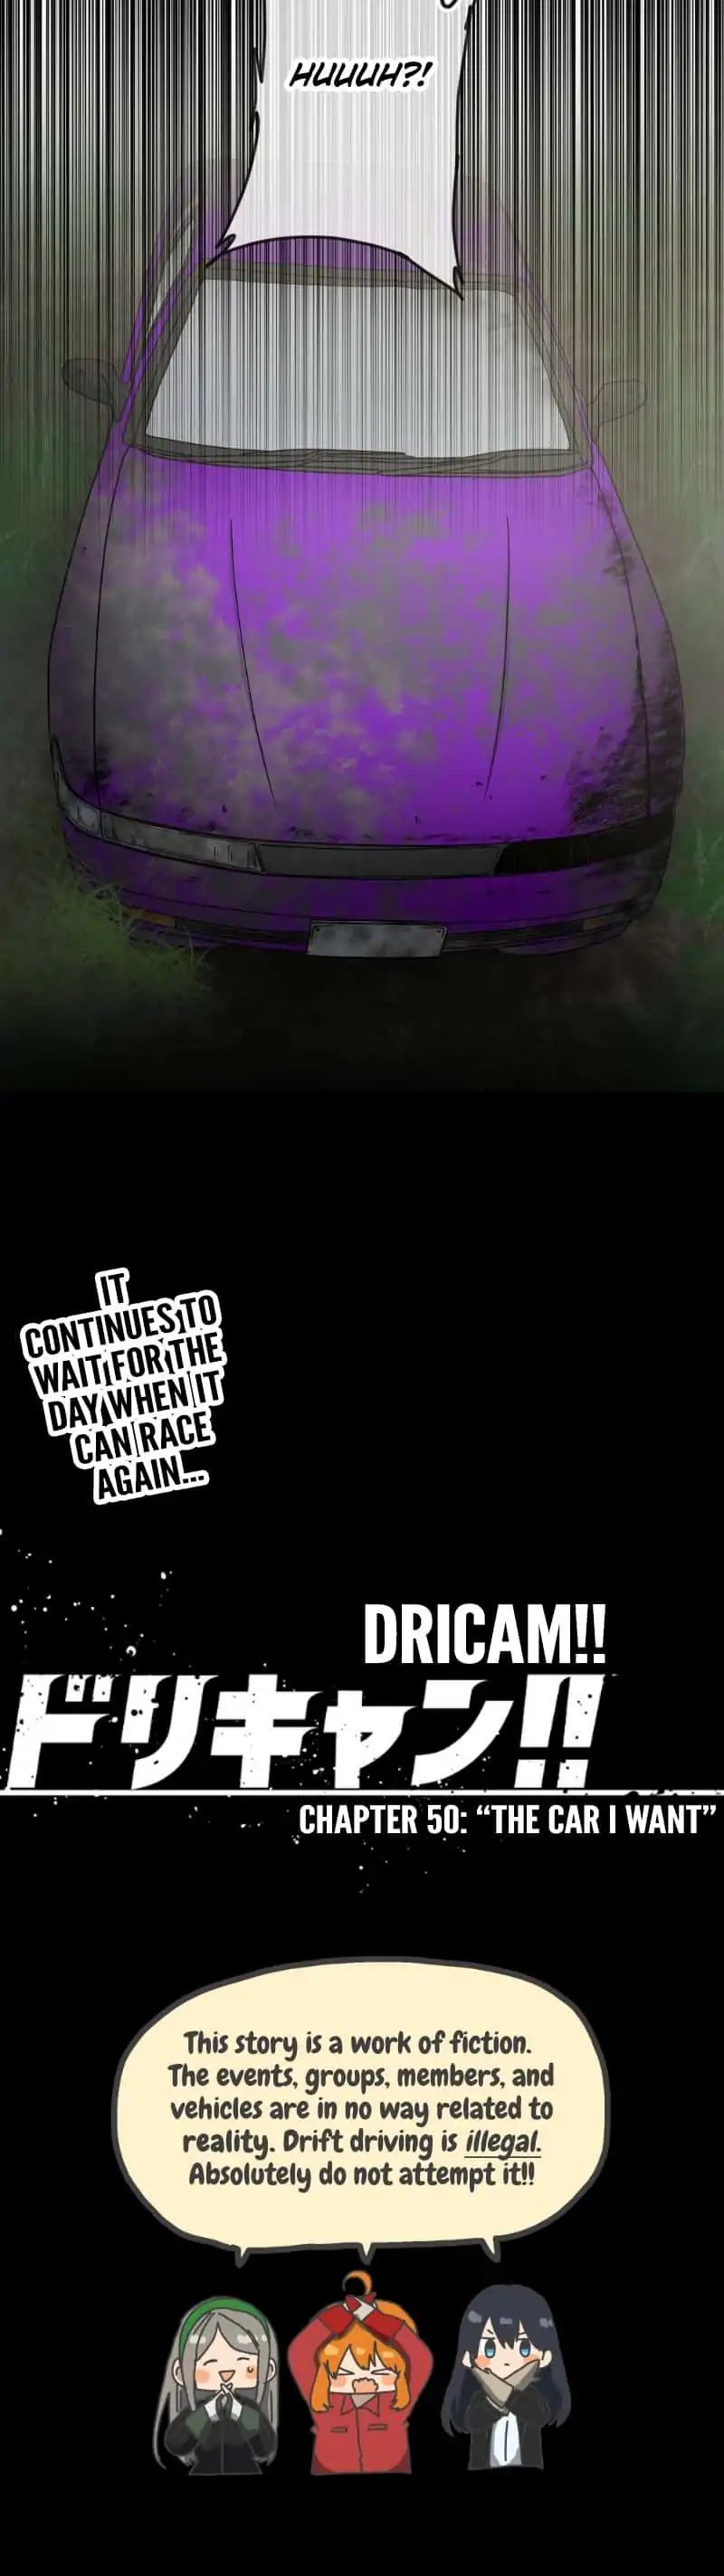 Dricam!! Chapter 50: The Car I Want